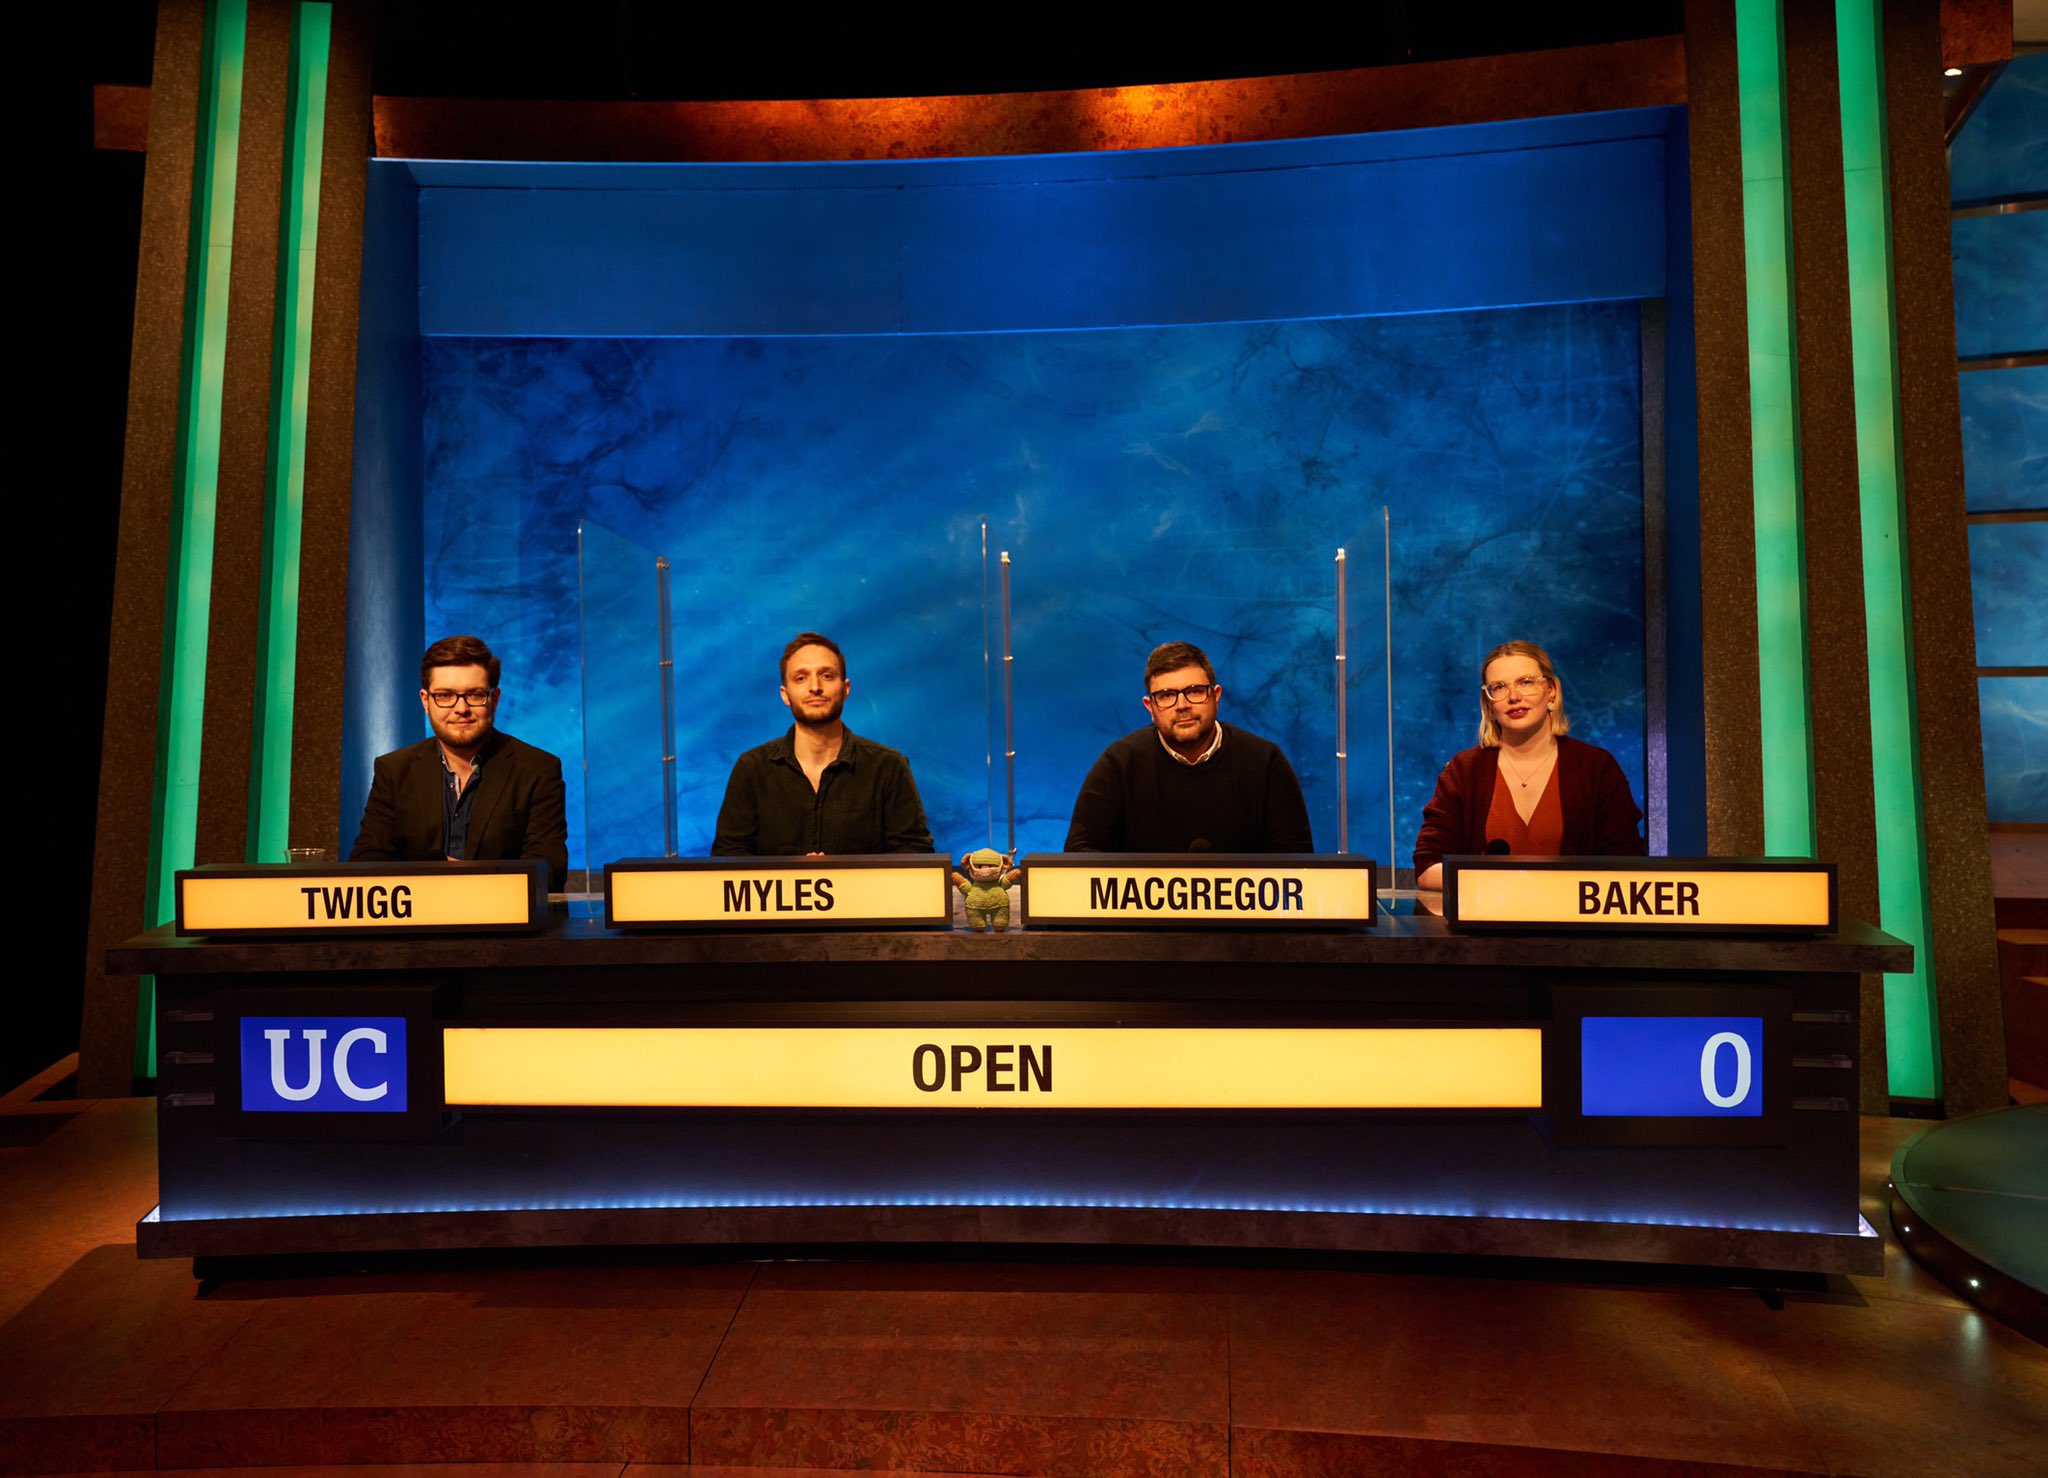 A photograph of the University Challenge team in the studio, from left to right Twigg, Myles, MacGregor, Baker.